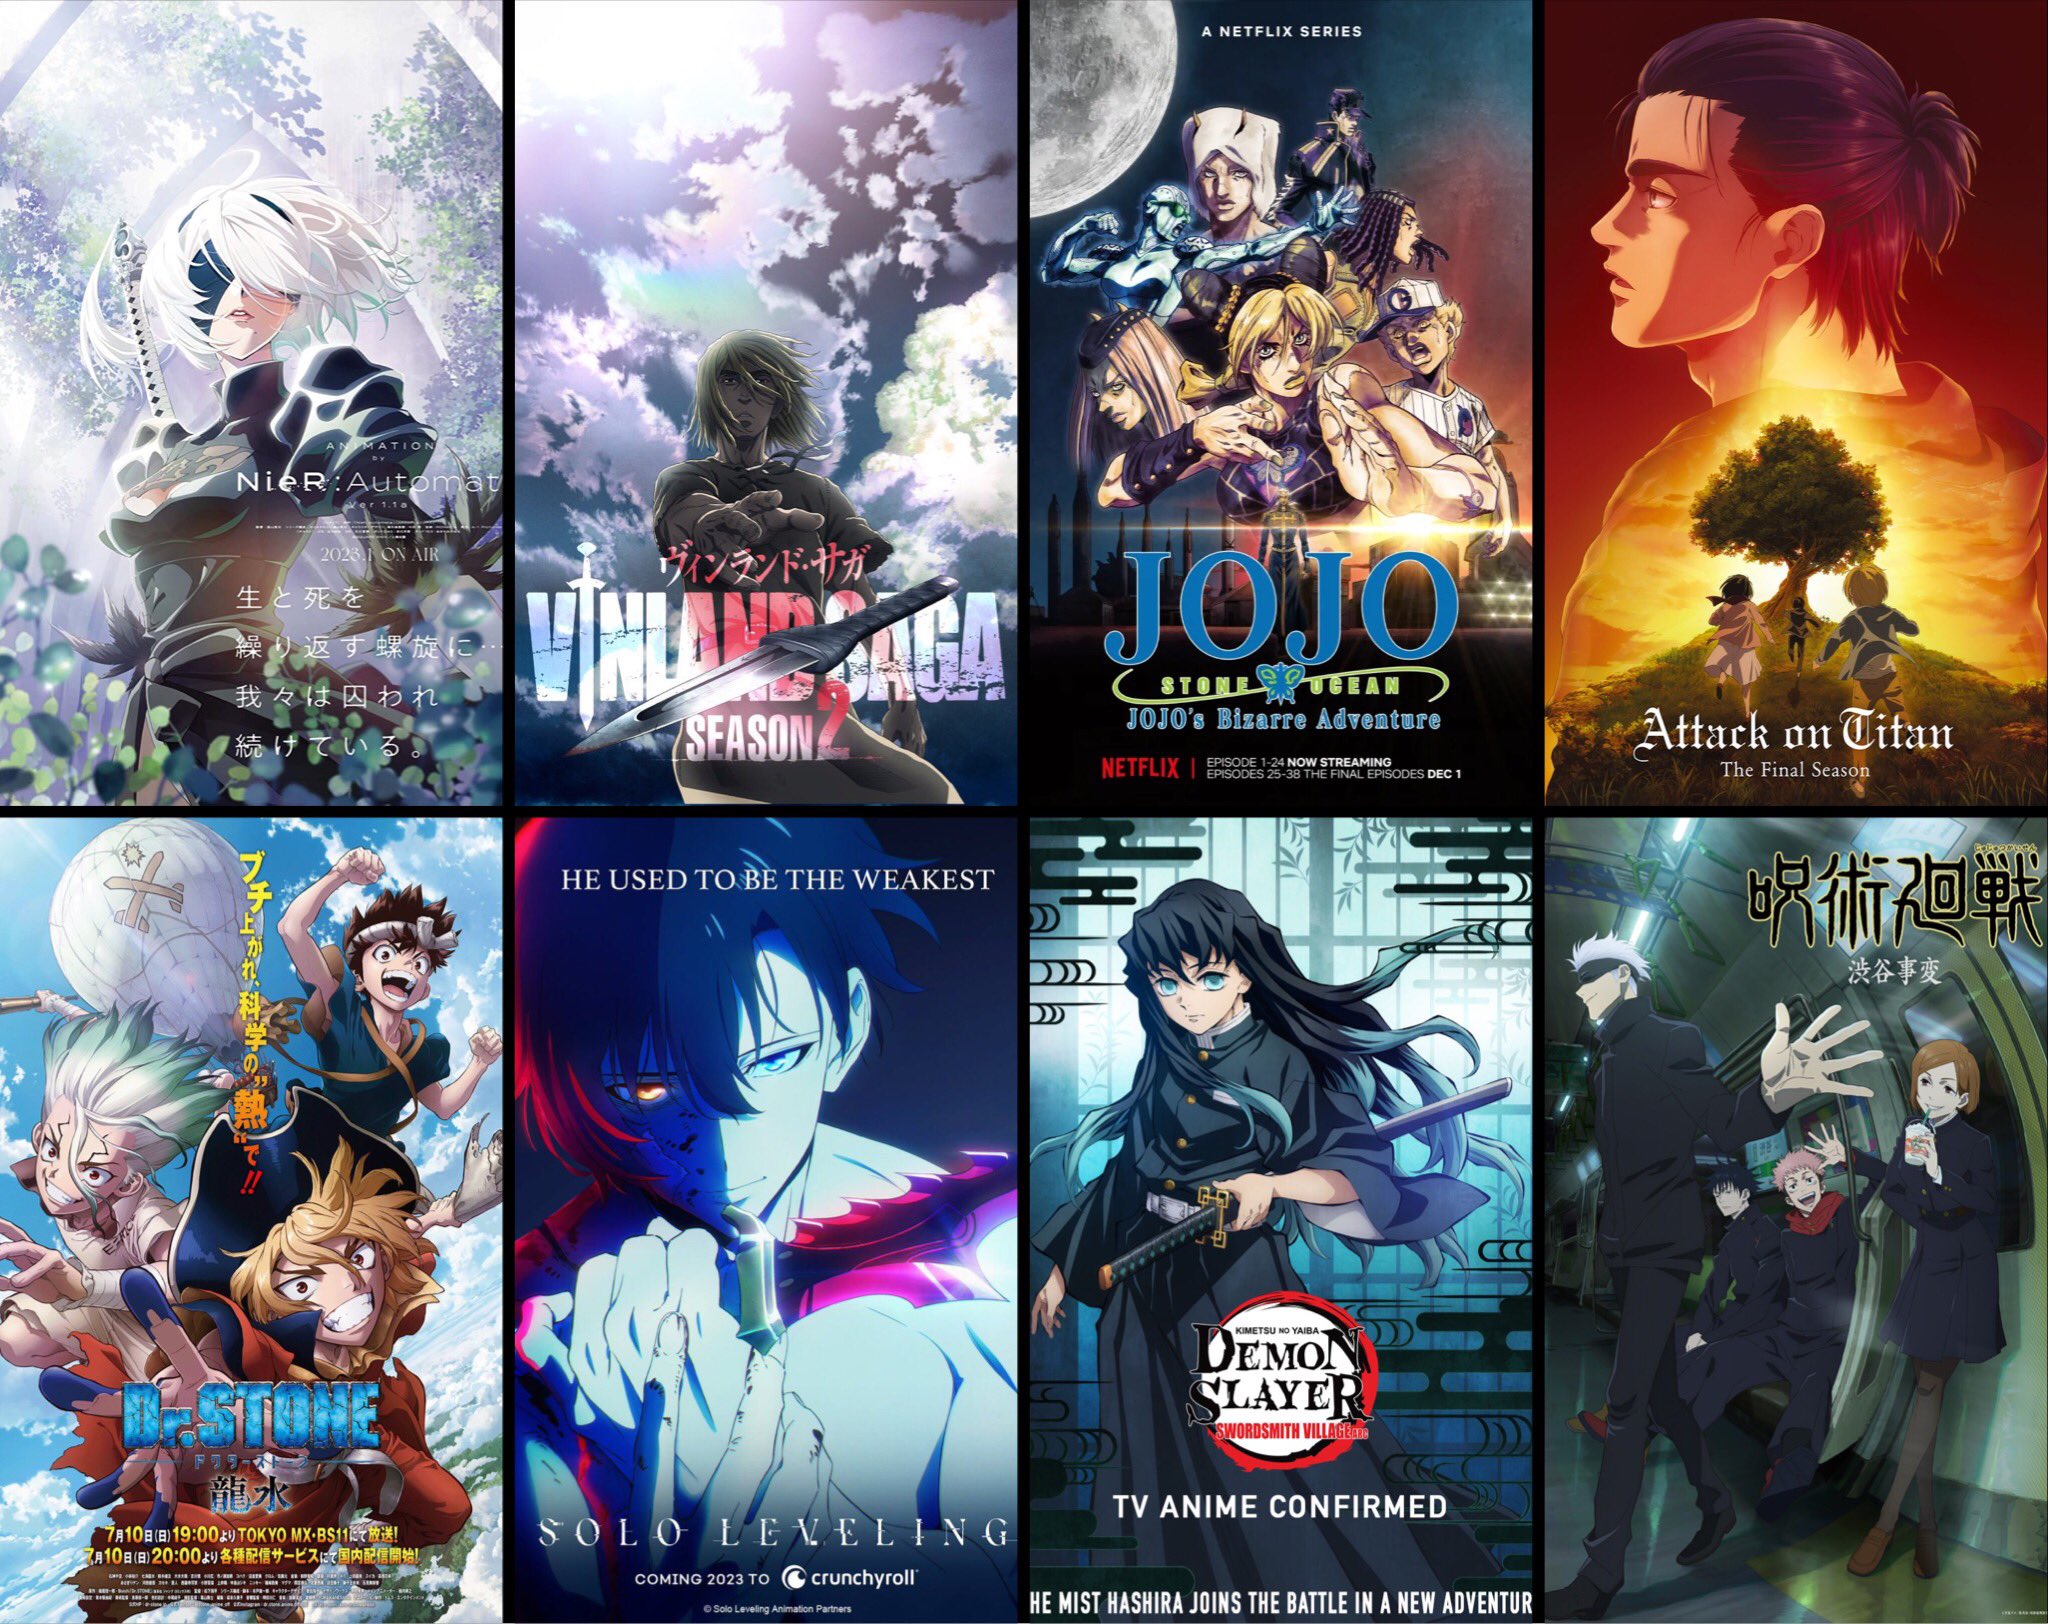 The Best Anime of 2019 - Top 10 New Anime Movies and Series to Watch